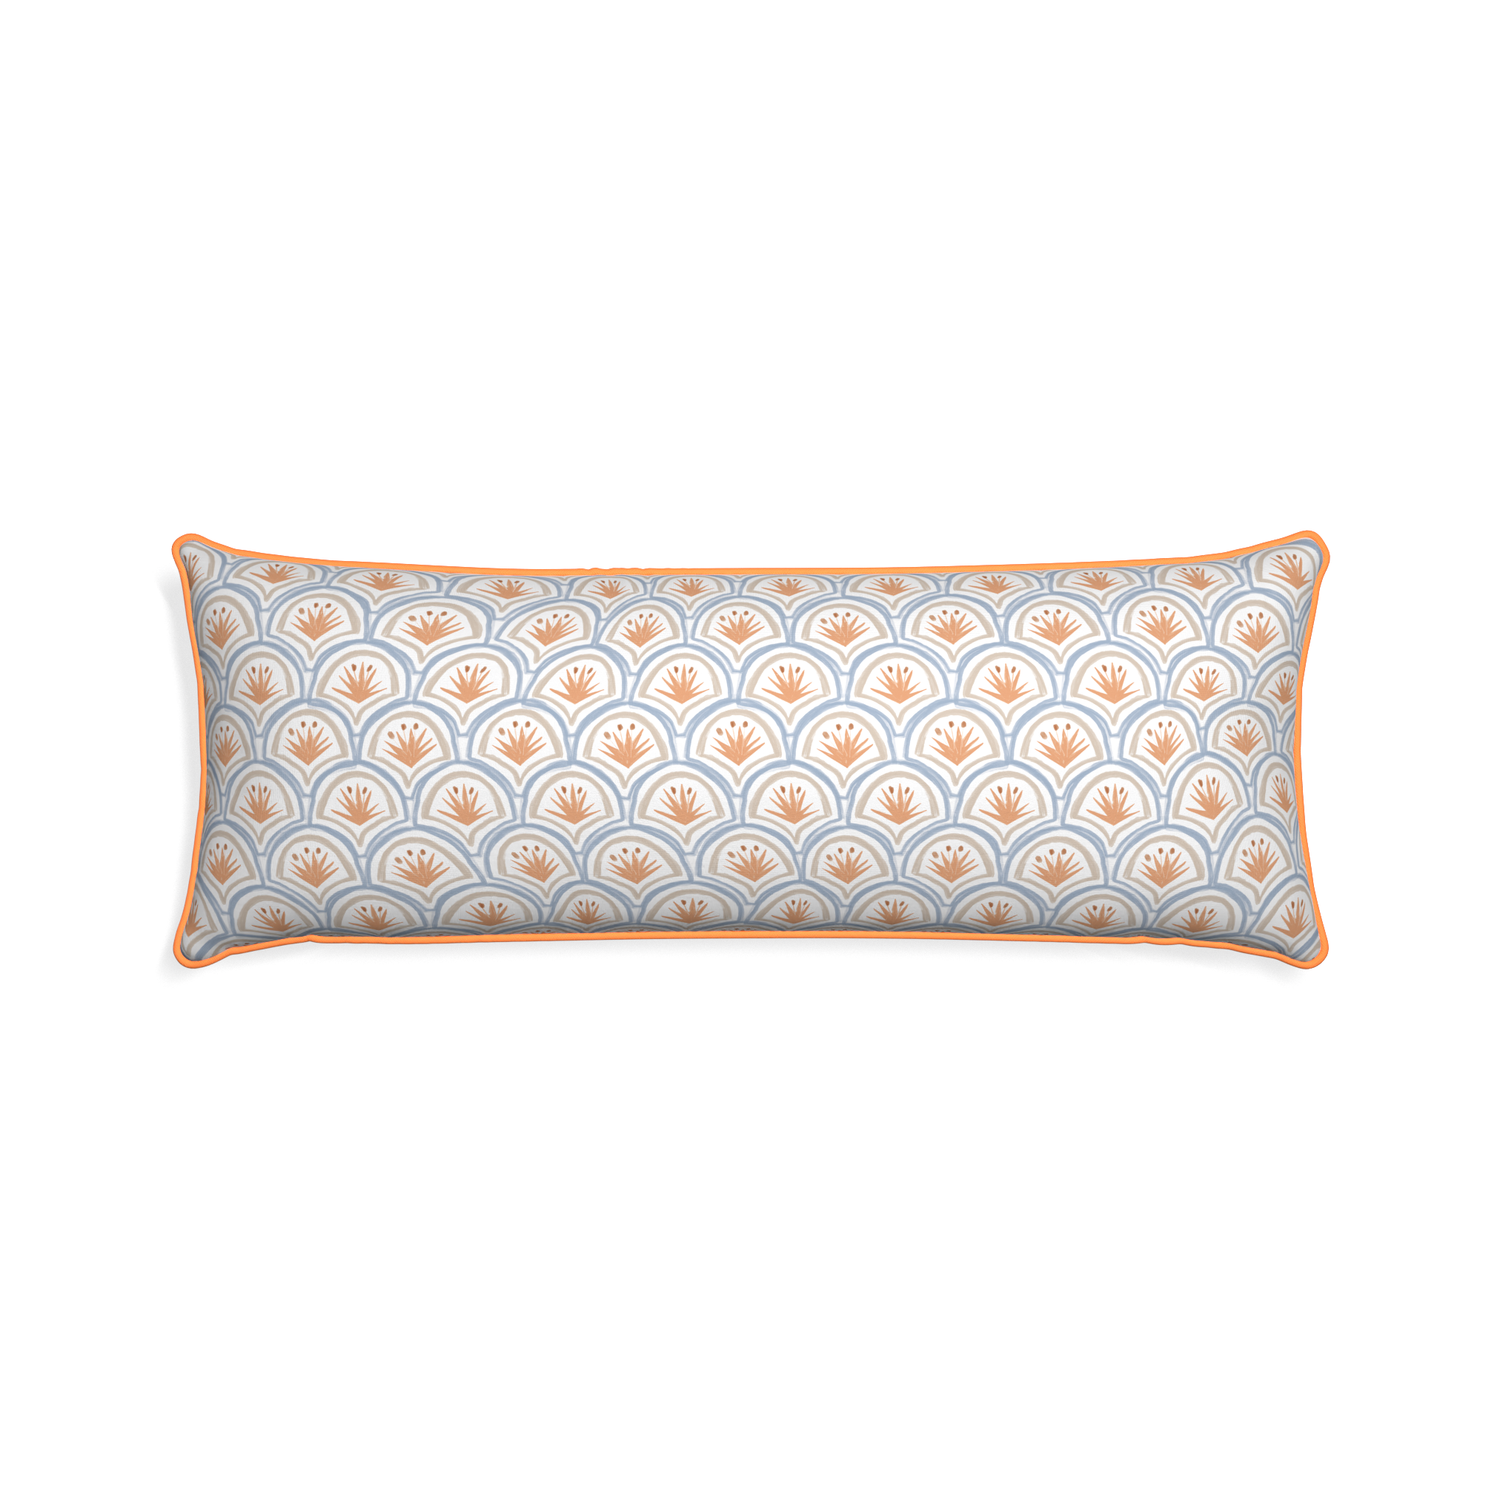 Xl-lumbar thatcher apricot custom art deco palm patternpillow with clementine piping on white background